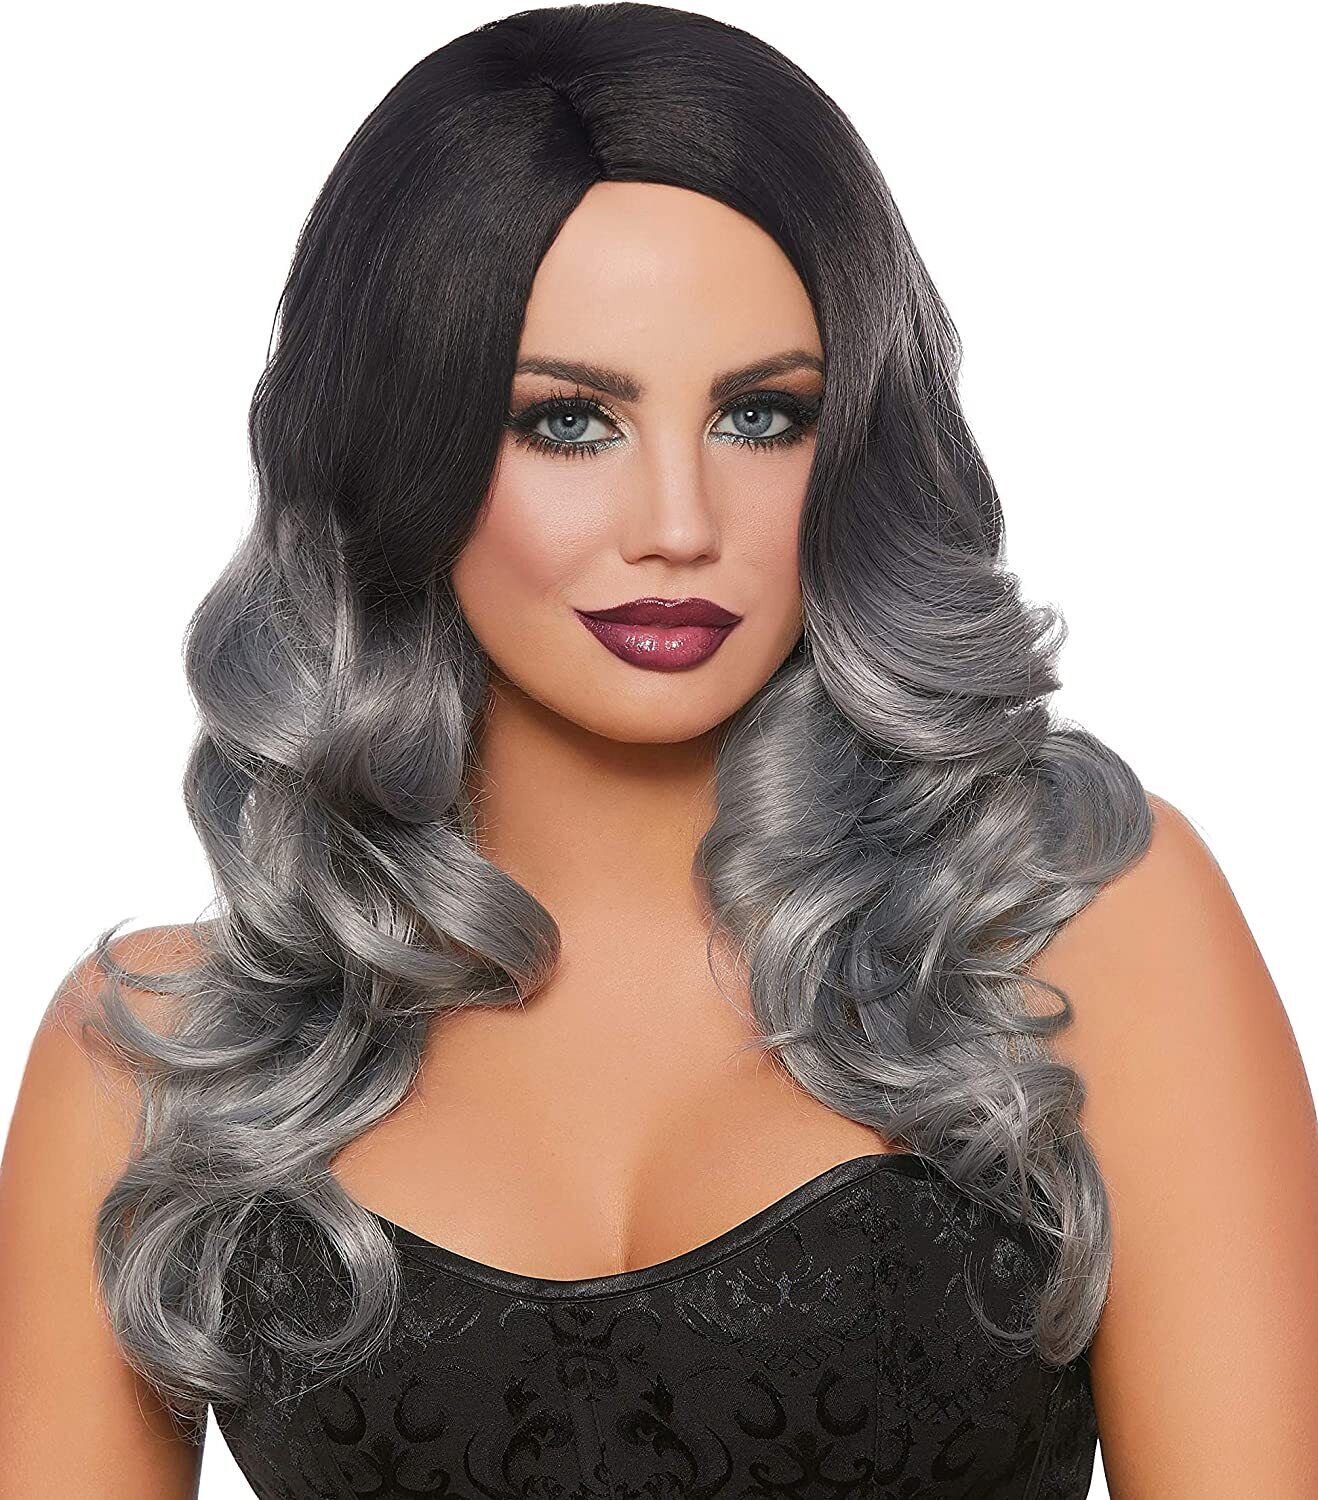 Dreamgirl Long Curly Black Grey Ombre Hair Wig Halloween Costume Accessory